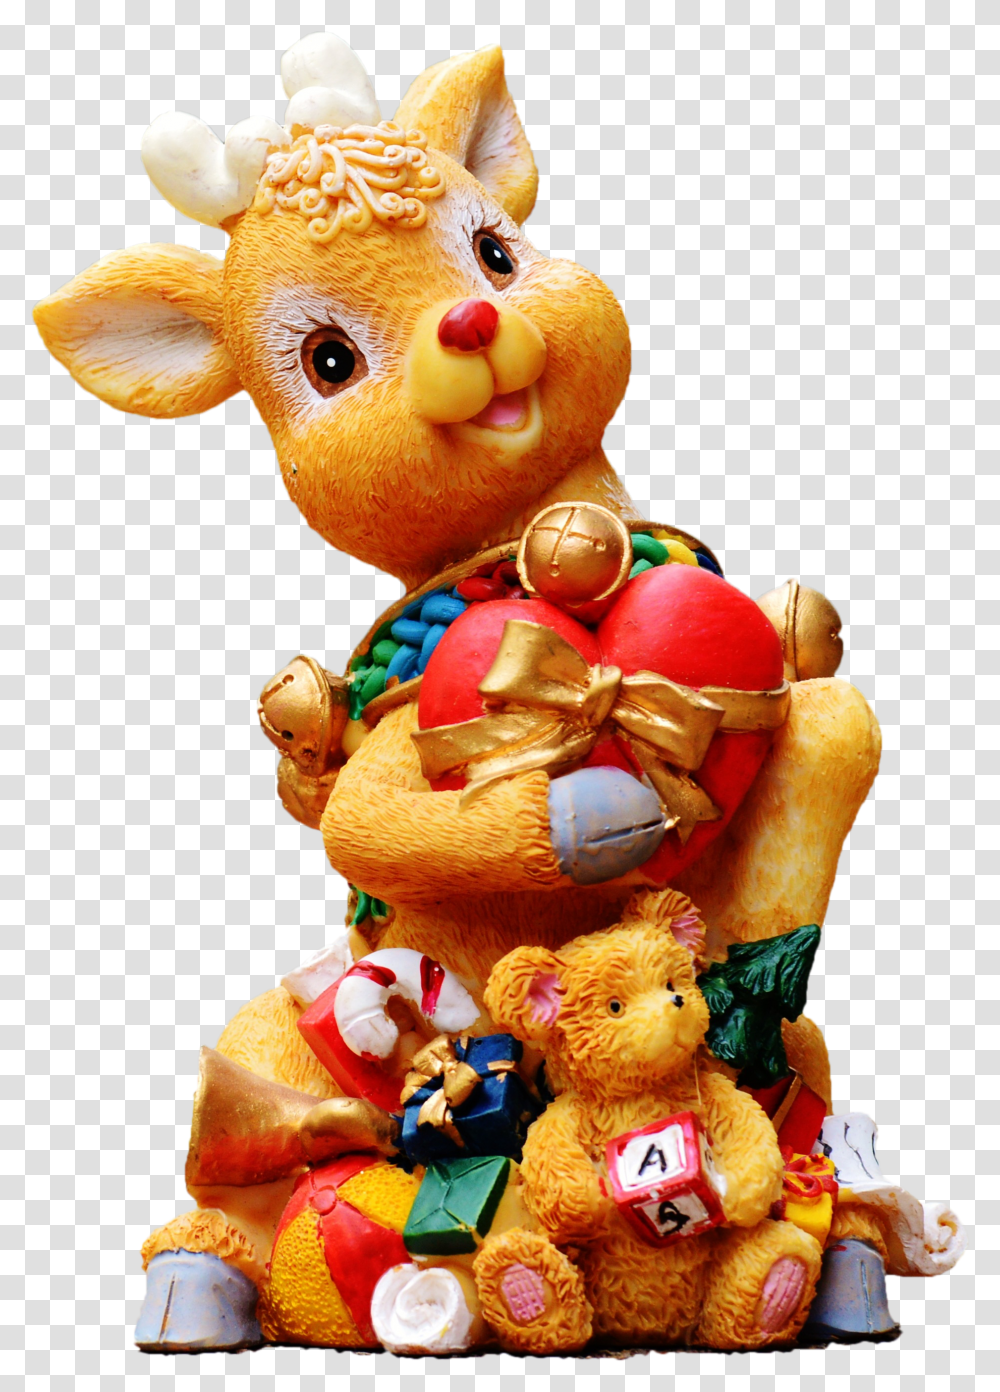 Free Funny Happy Reindeer Christmas Image Transparent Png